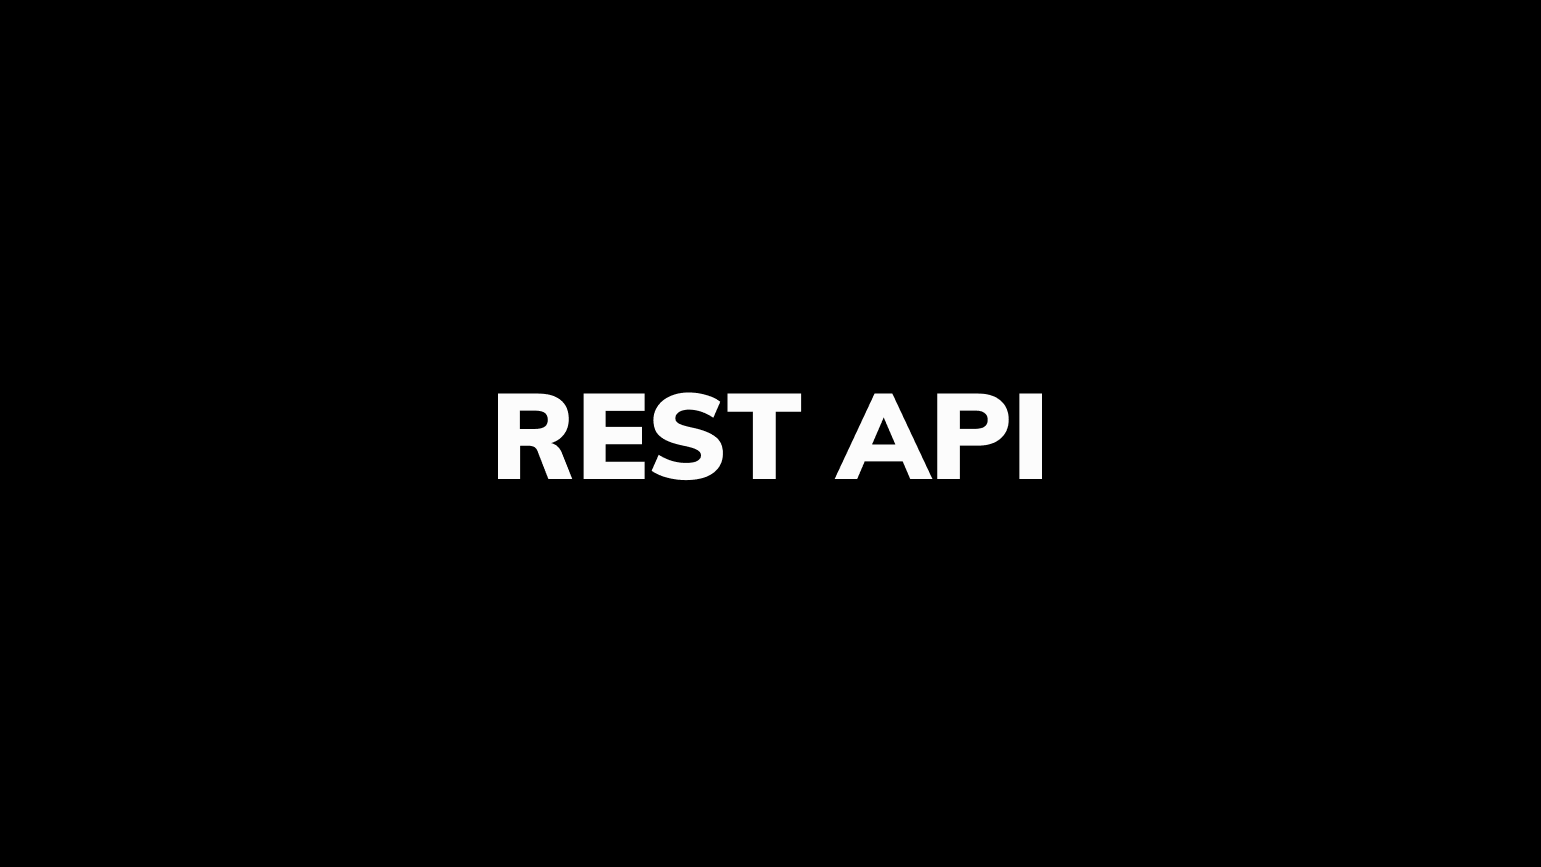 Rest API is live!